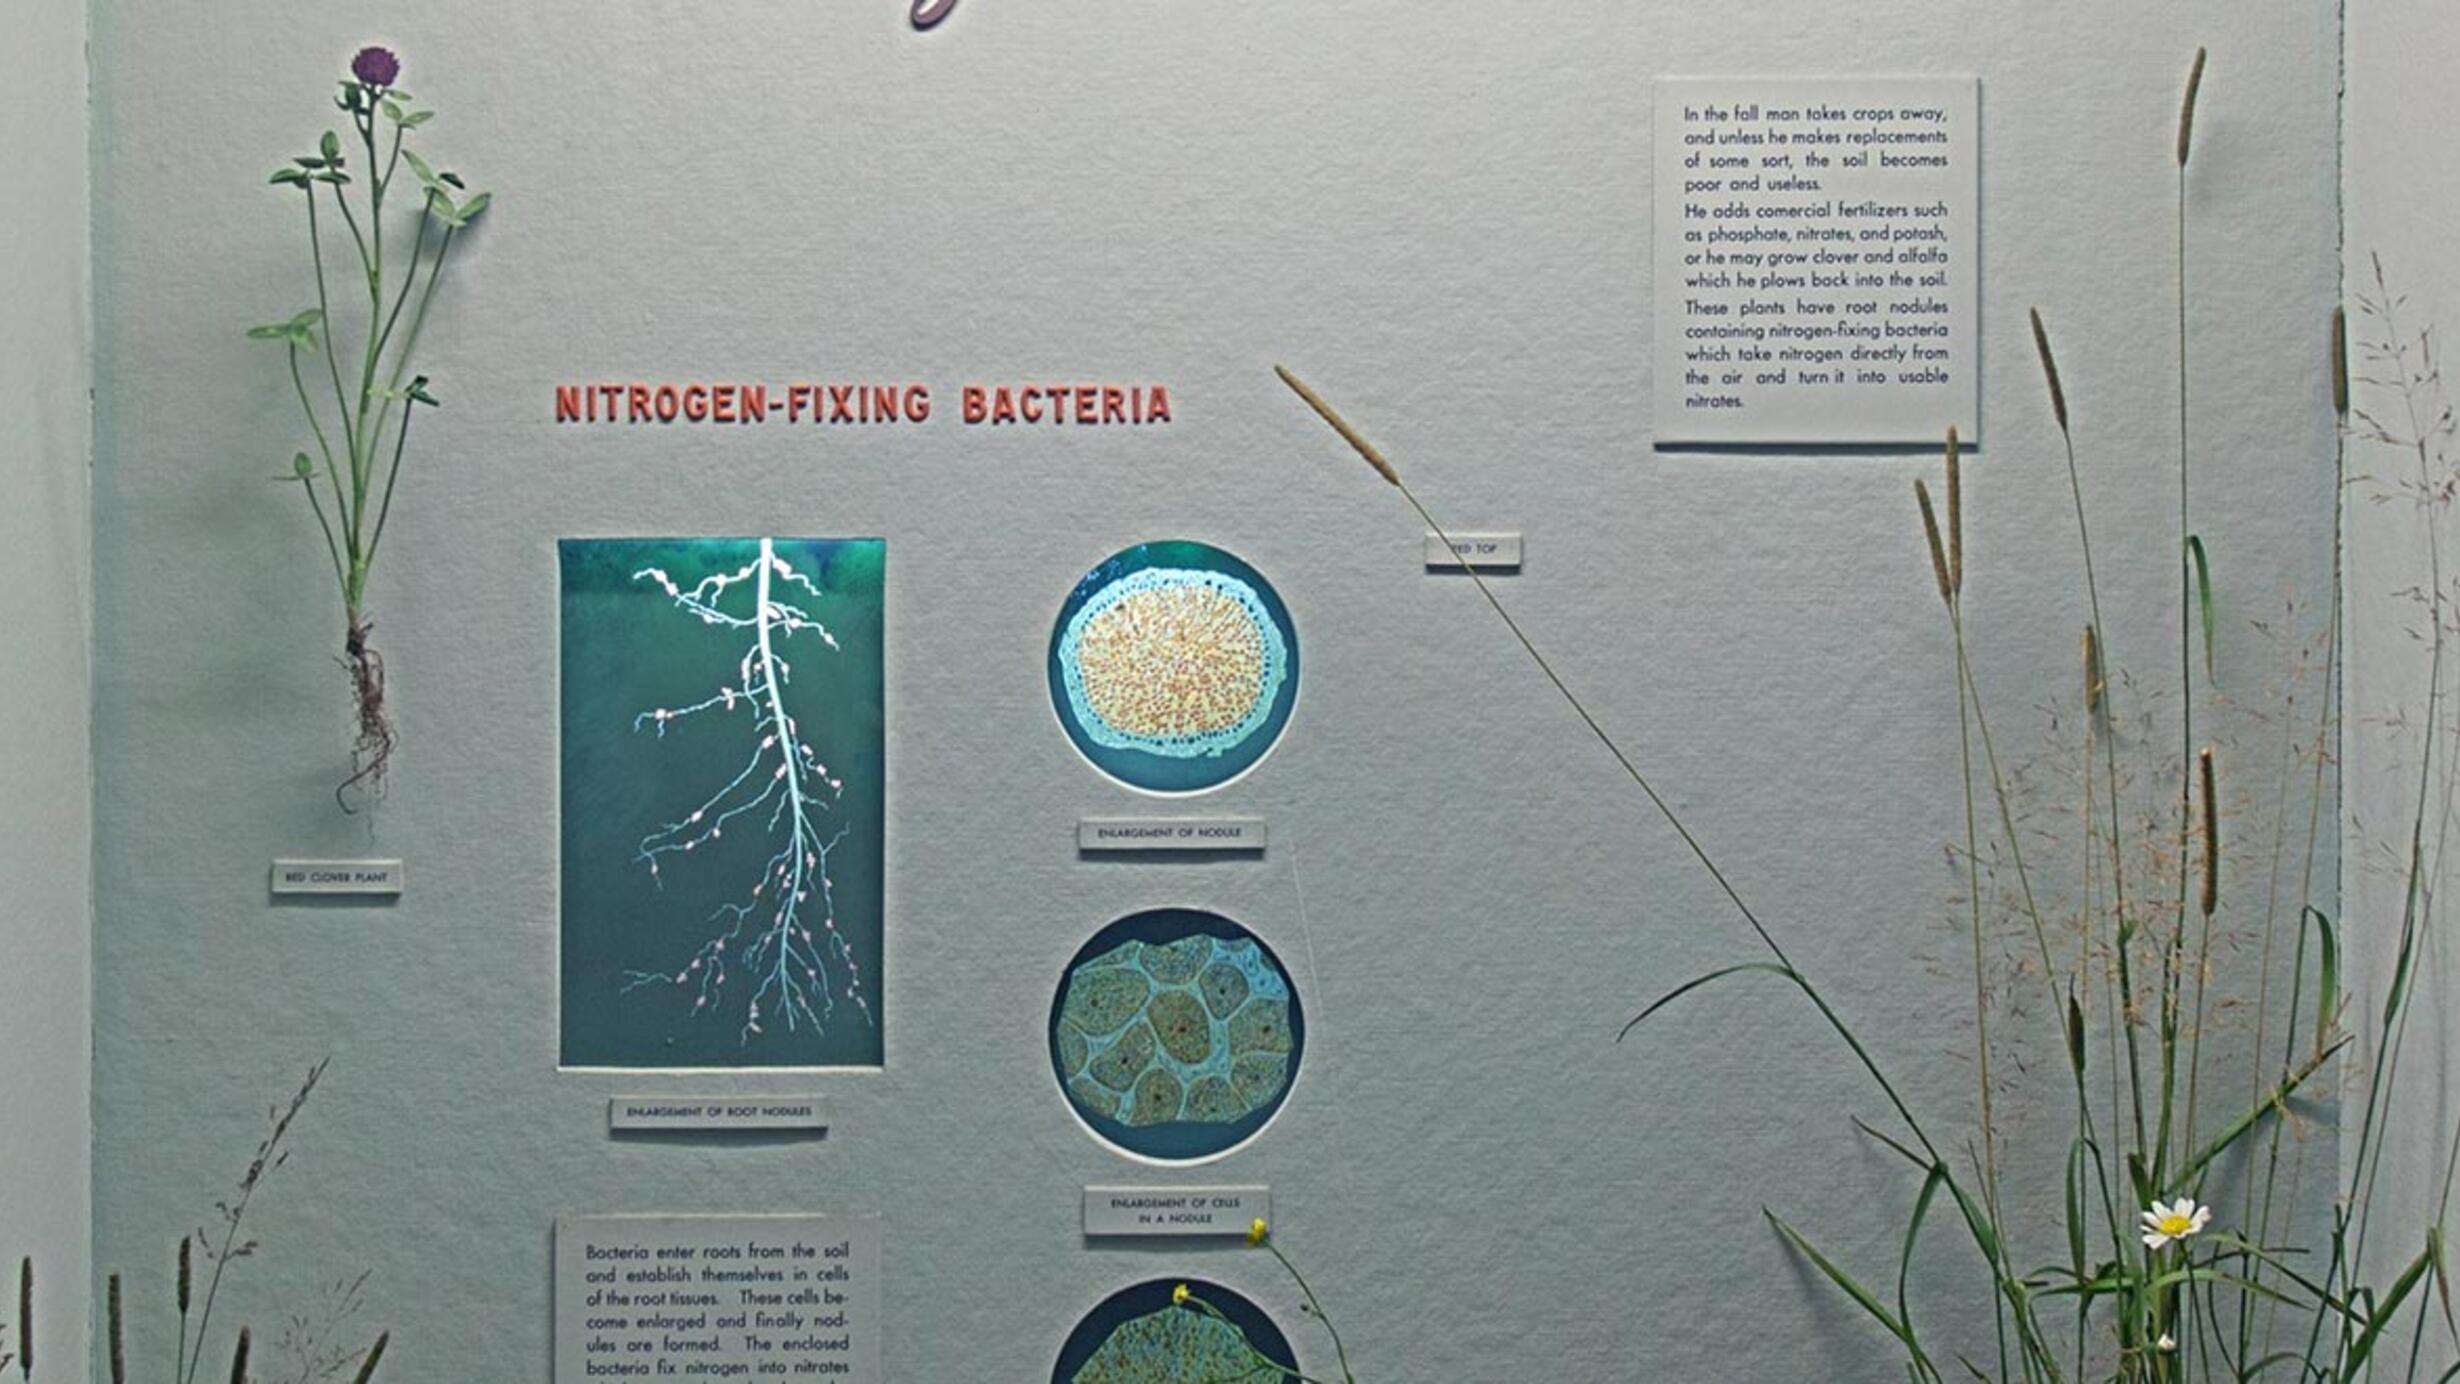 Museum case showing illustrations, diagrams and models of the fertilizers in the soil and their effects in vegetation.